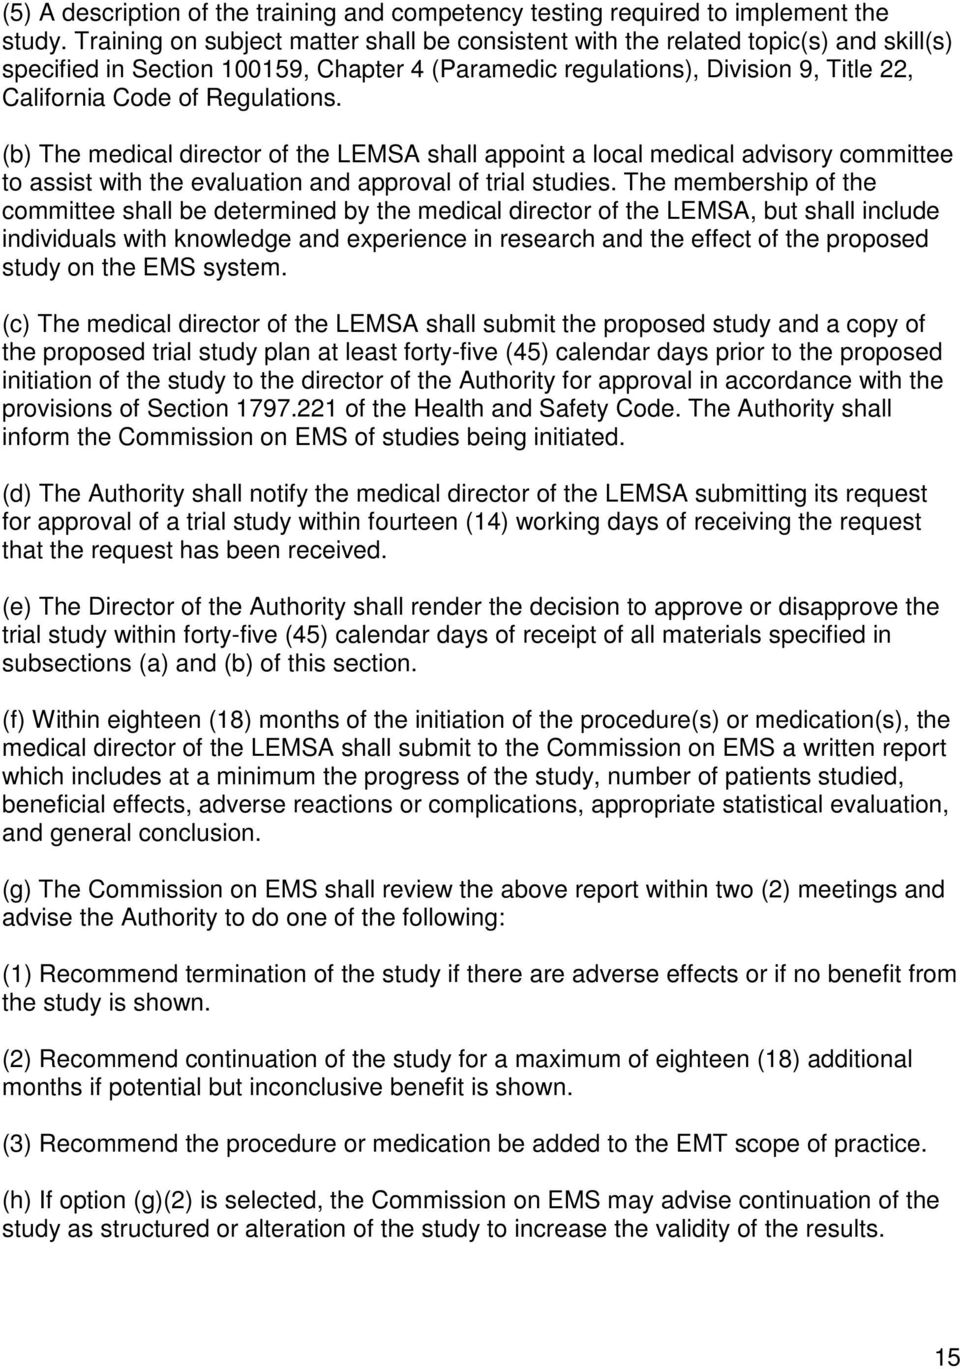 Regulations. (b) The medical director of the LEMSA shall appoint a local medical advisory committee to assist with the evaluation and approval of trial studies.